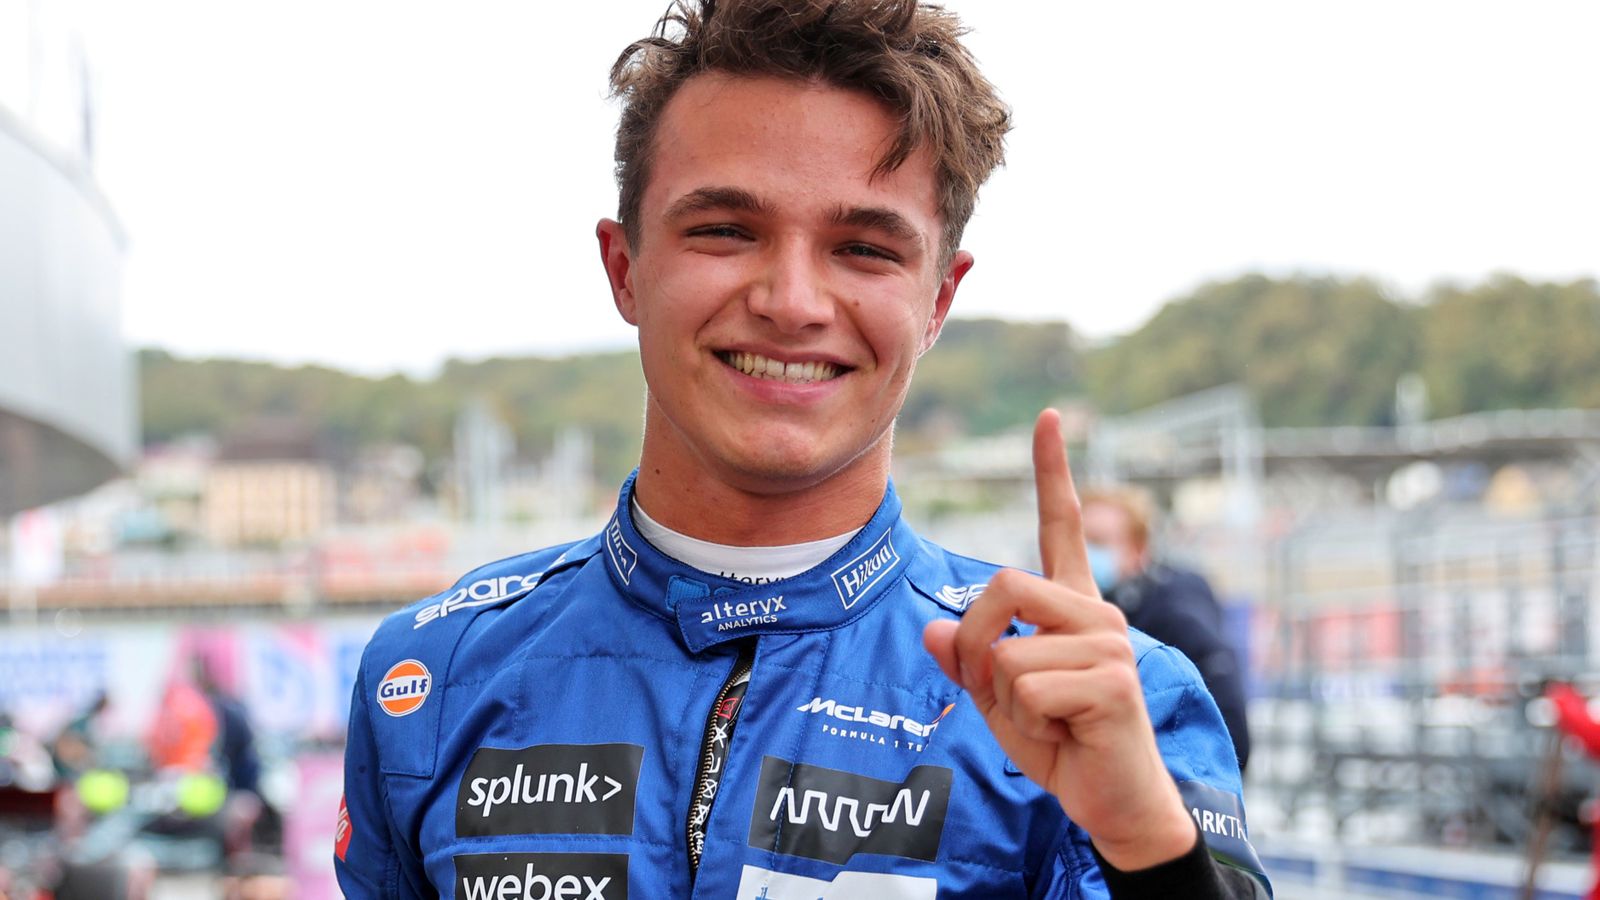 Lando Norris confesses to having discussions with other teams before to McLaren’s renewal